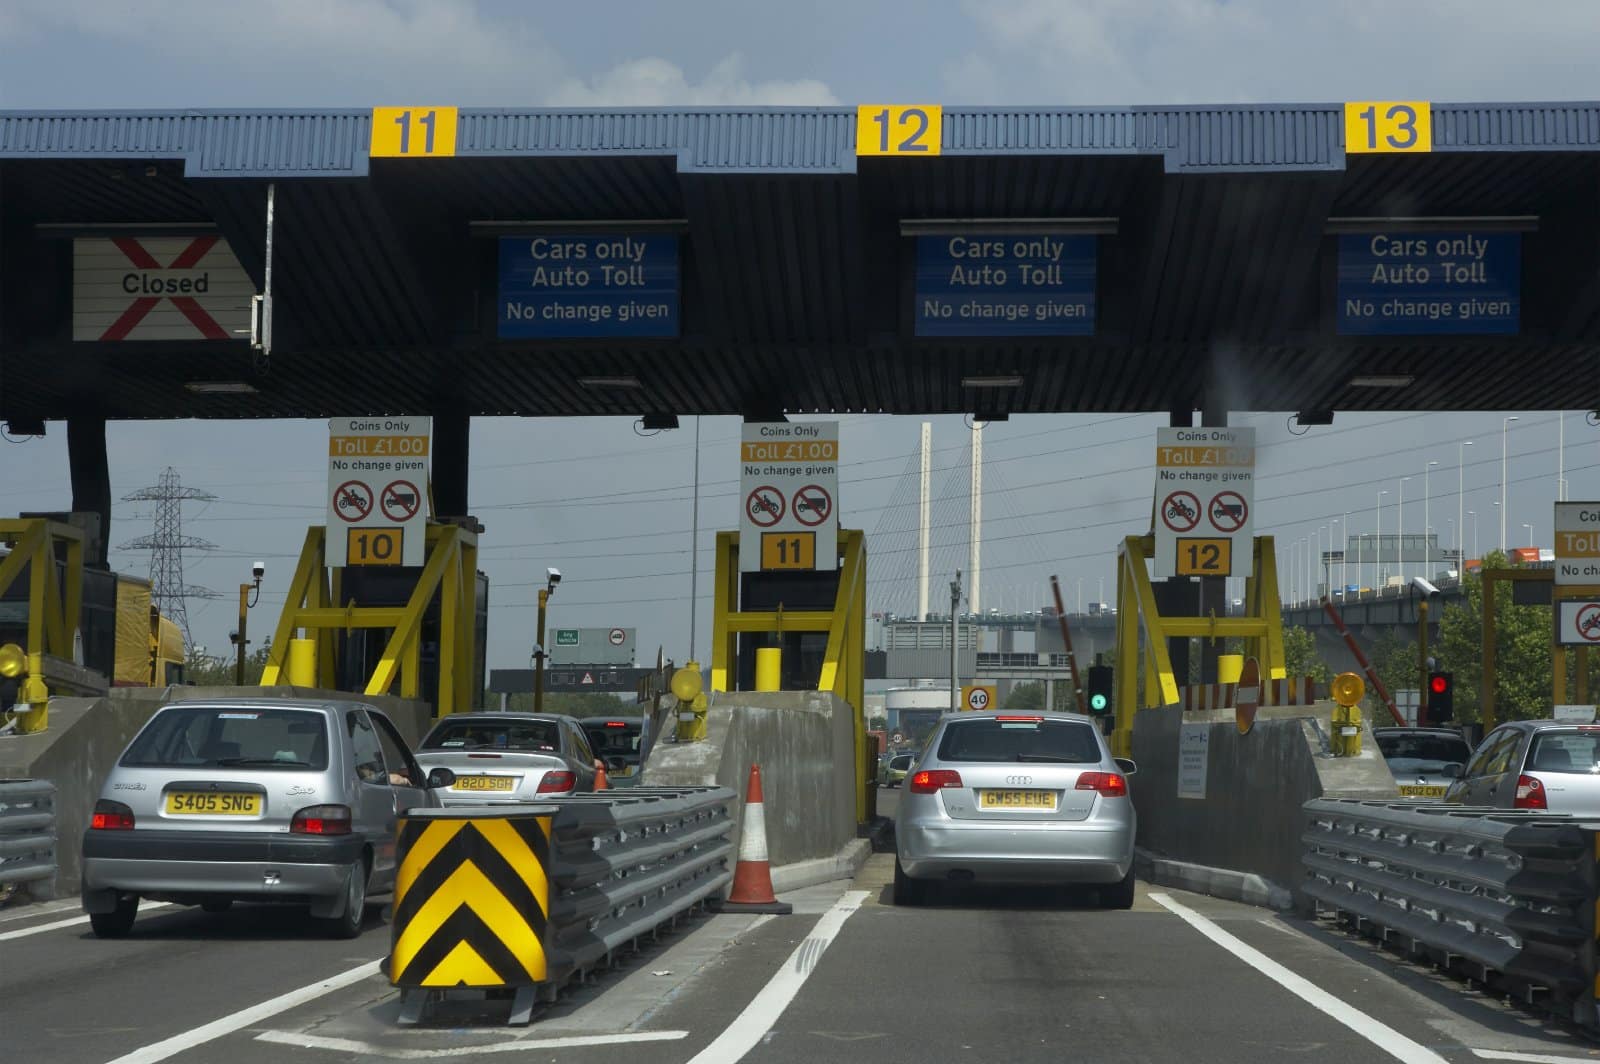 <p class="wp-caption-text">Image Credit: Shutterstock / Daniel Heighton</p>  <p><span>Toll roads are common abroad. Have local currency on hand or learn about the electronic toll collection systems in use to avoid getting stuck at a toll booth.</span></p>